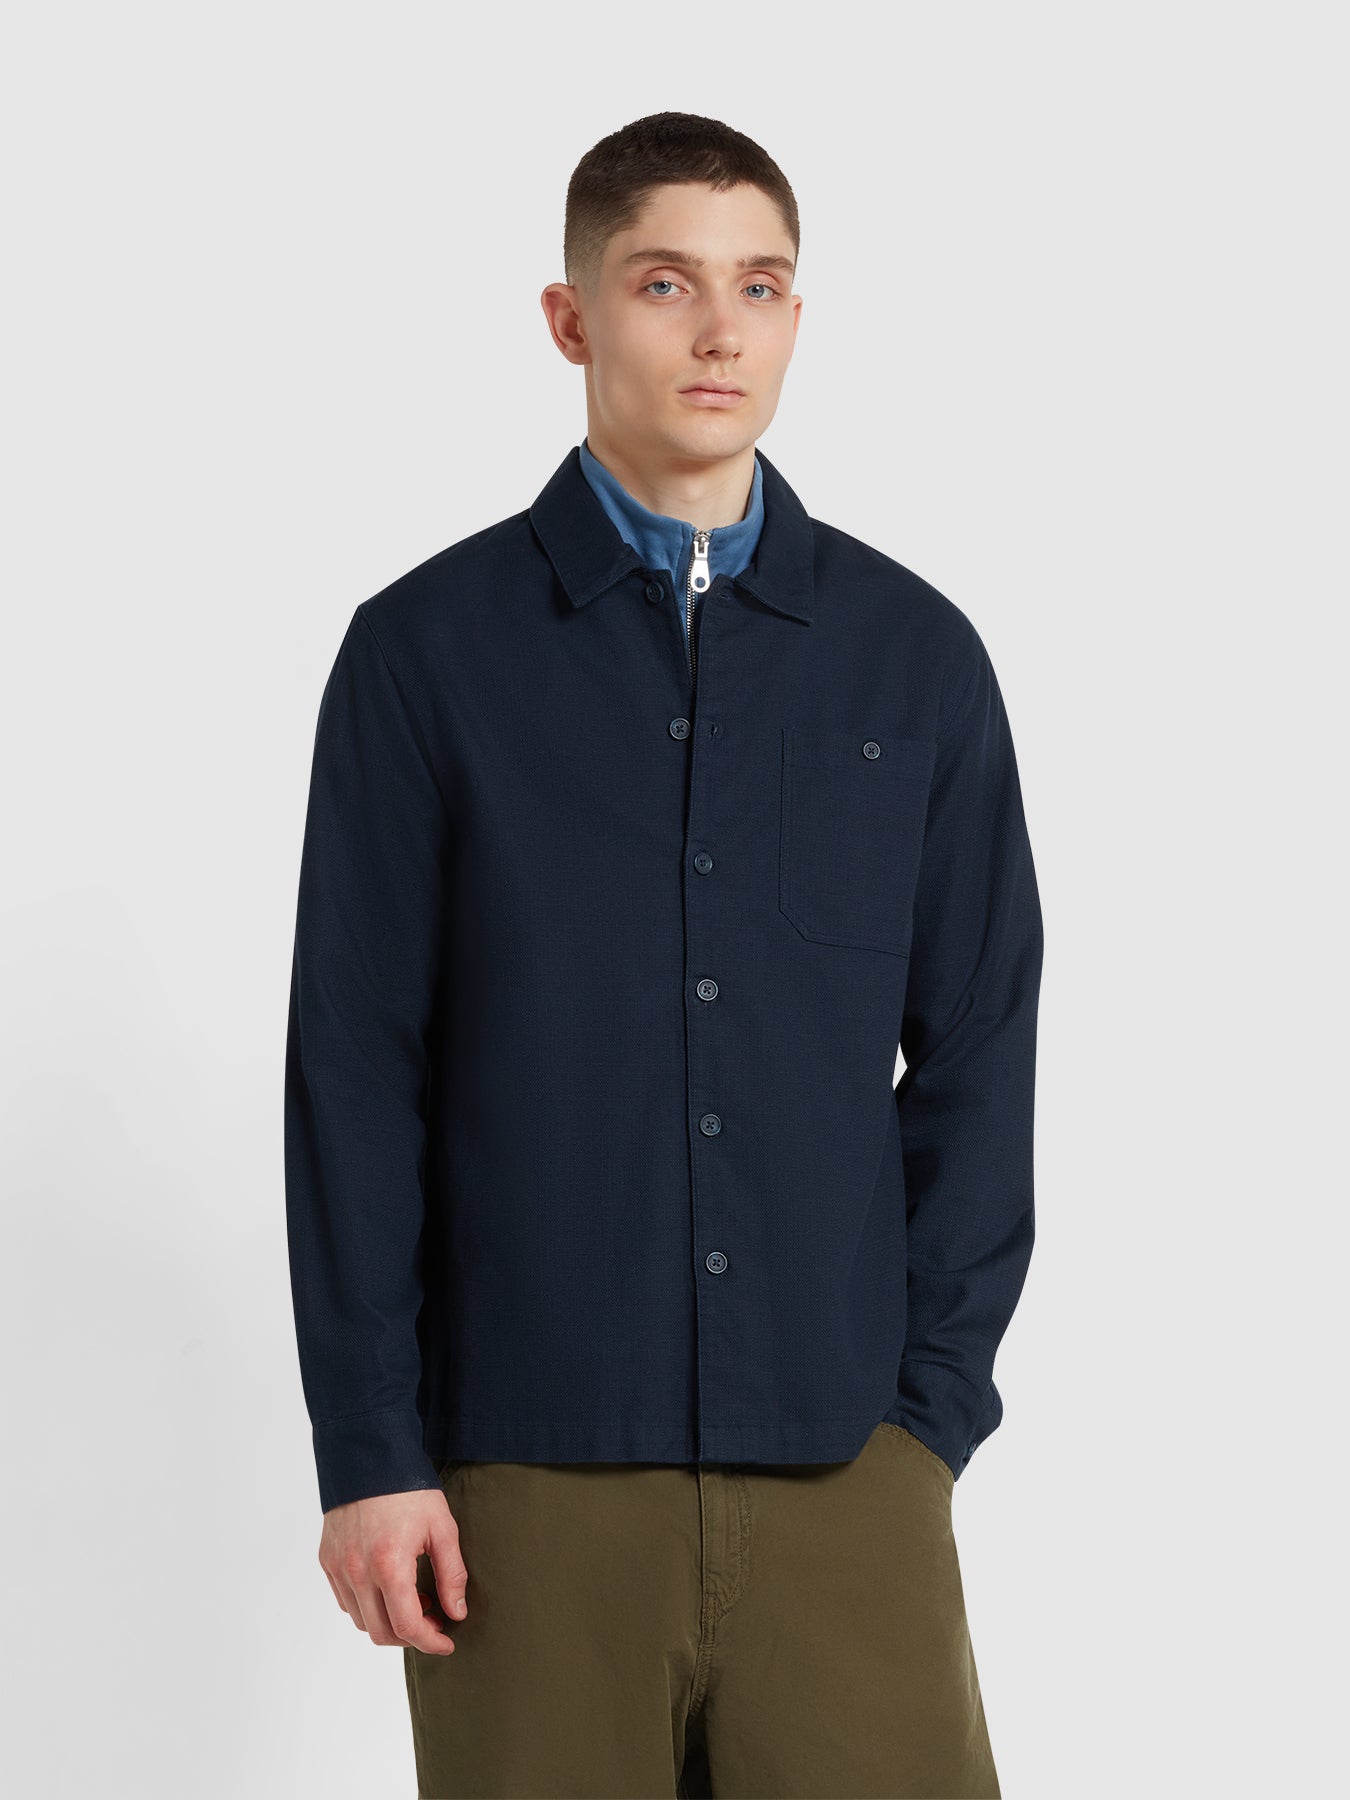 View Firmin Relaxed Fit Overshirt In True Navy information